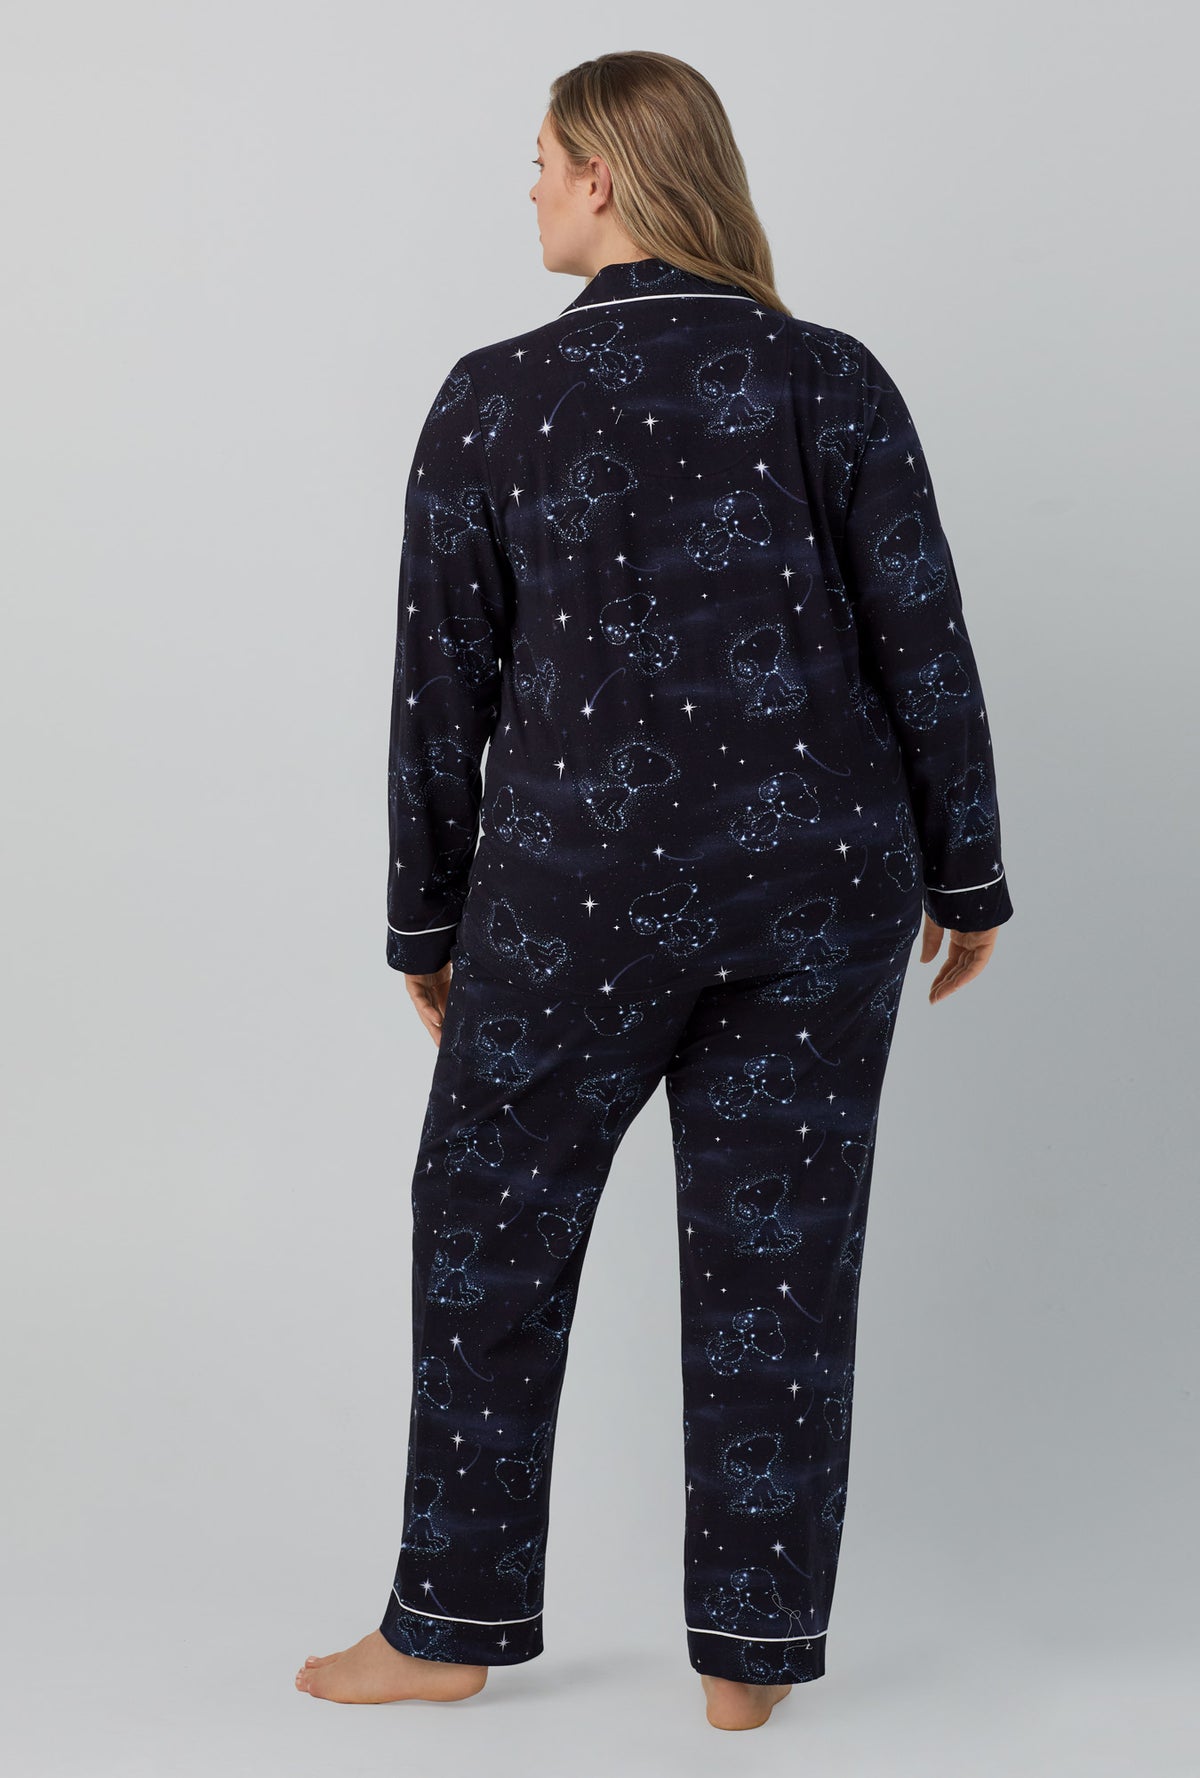 A lady wearing black  Long Sleeve Classic Stretch Jersey PJ Set with Celestial Snoopy  print